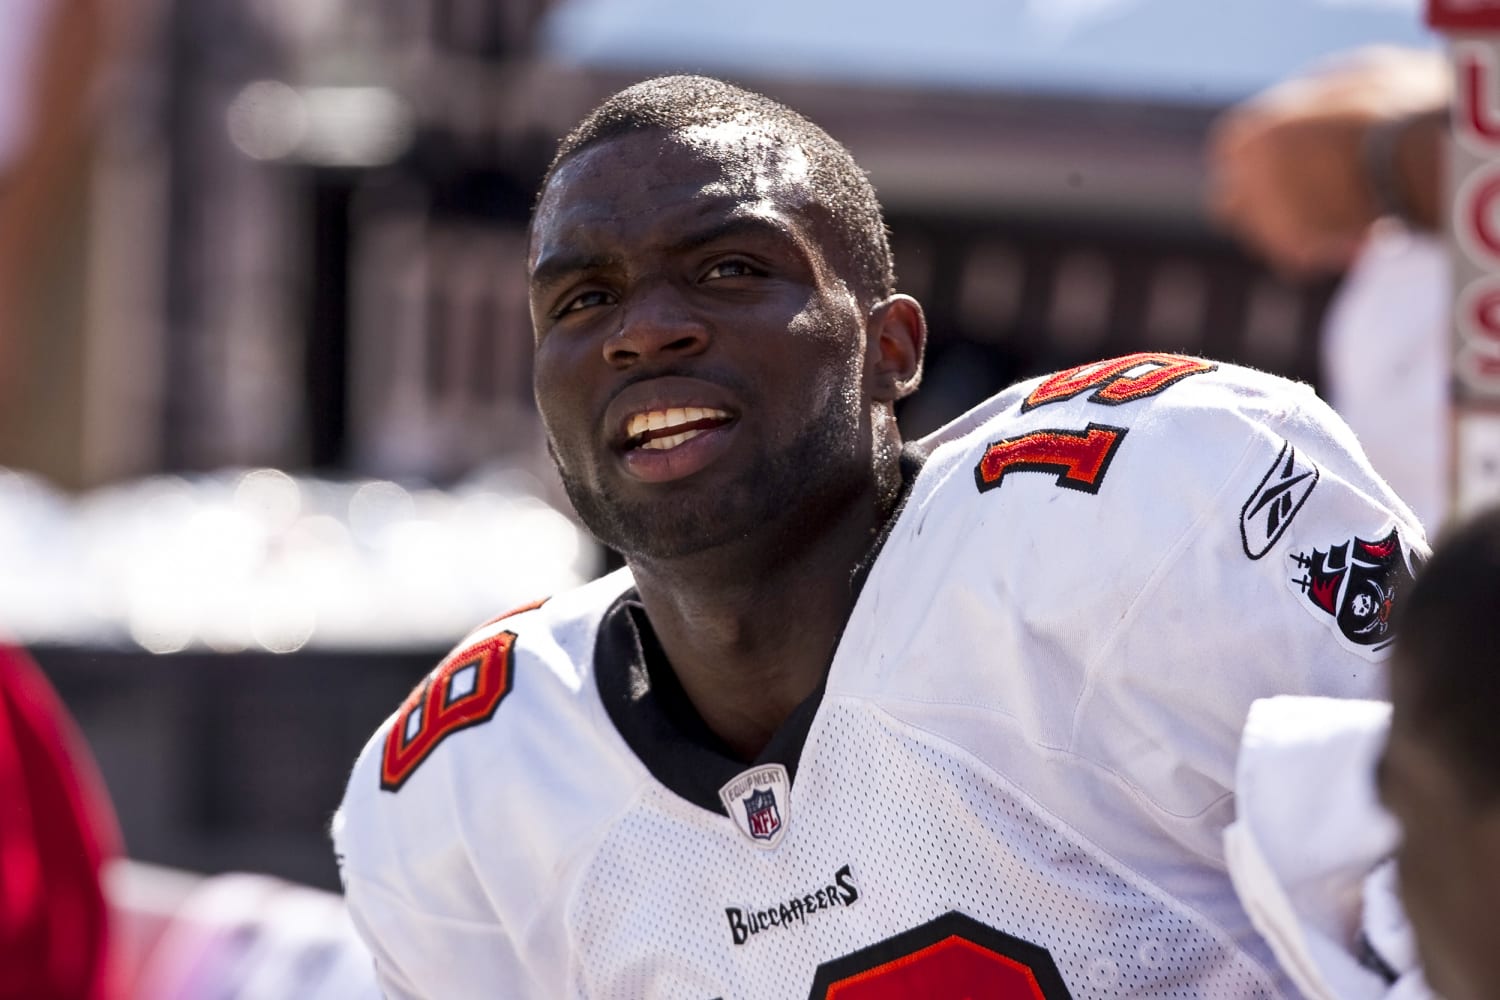 Former NFL wide receiver Mike Williams dies at 36 after construction site accident